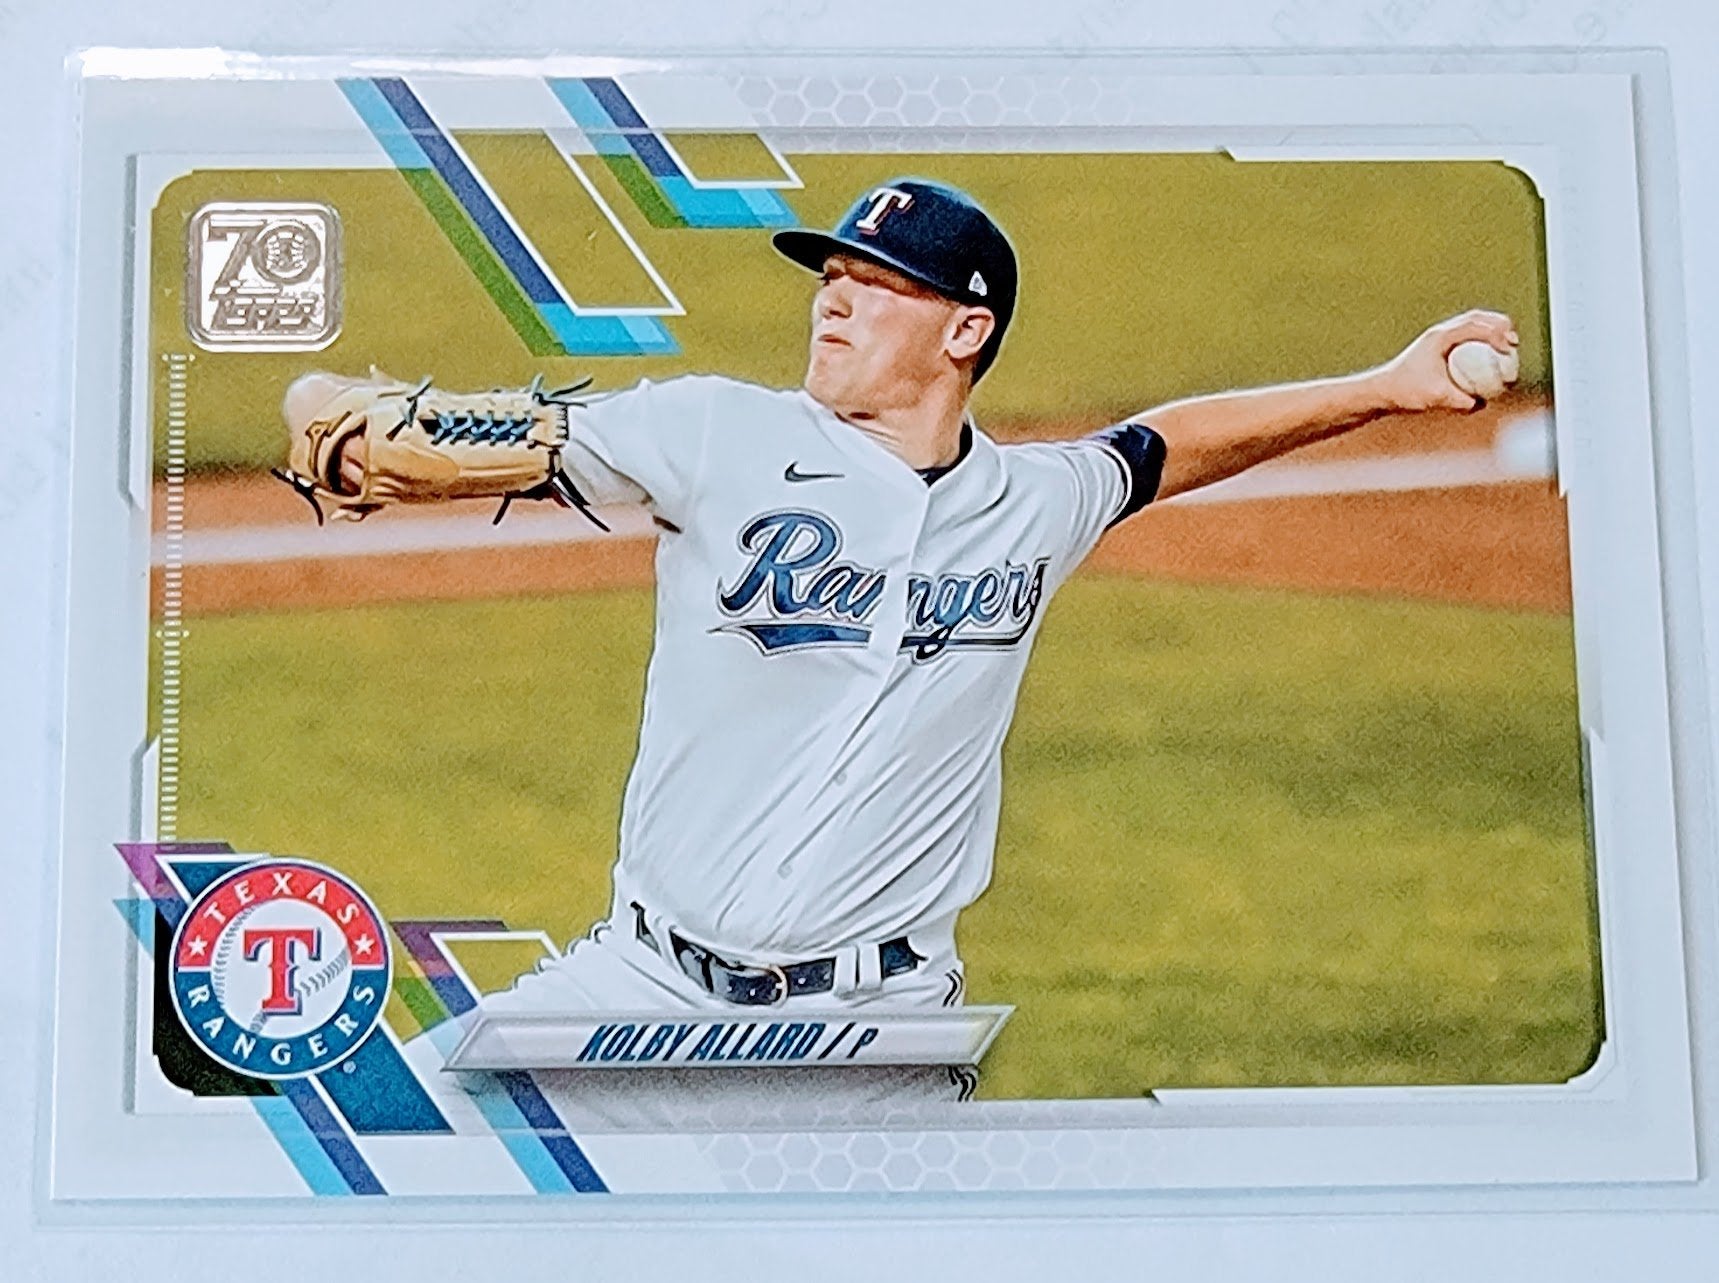 2021 Topps Update Kolby Allard Baseball Trading Card SMCB1 simple Xclusive Collectibles   